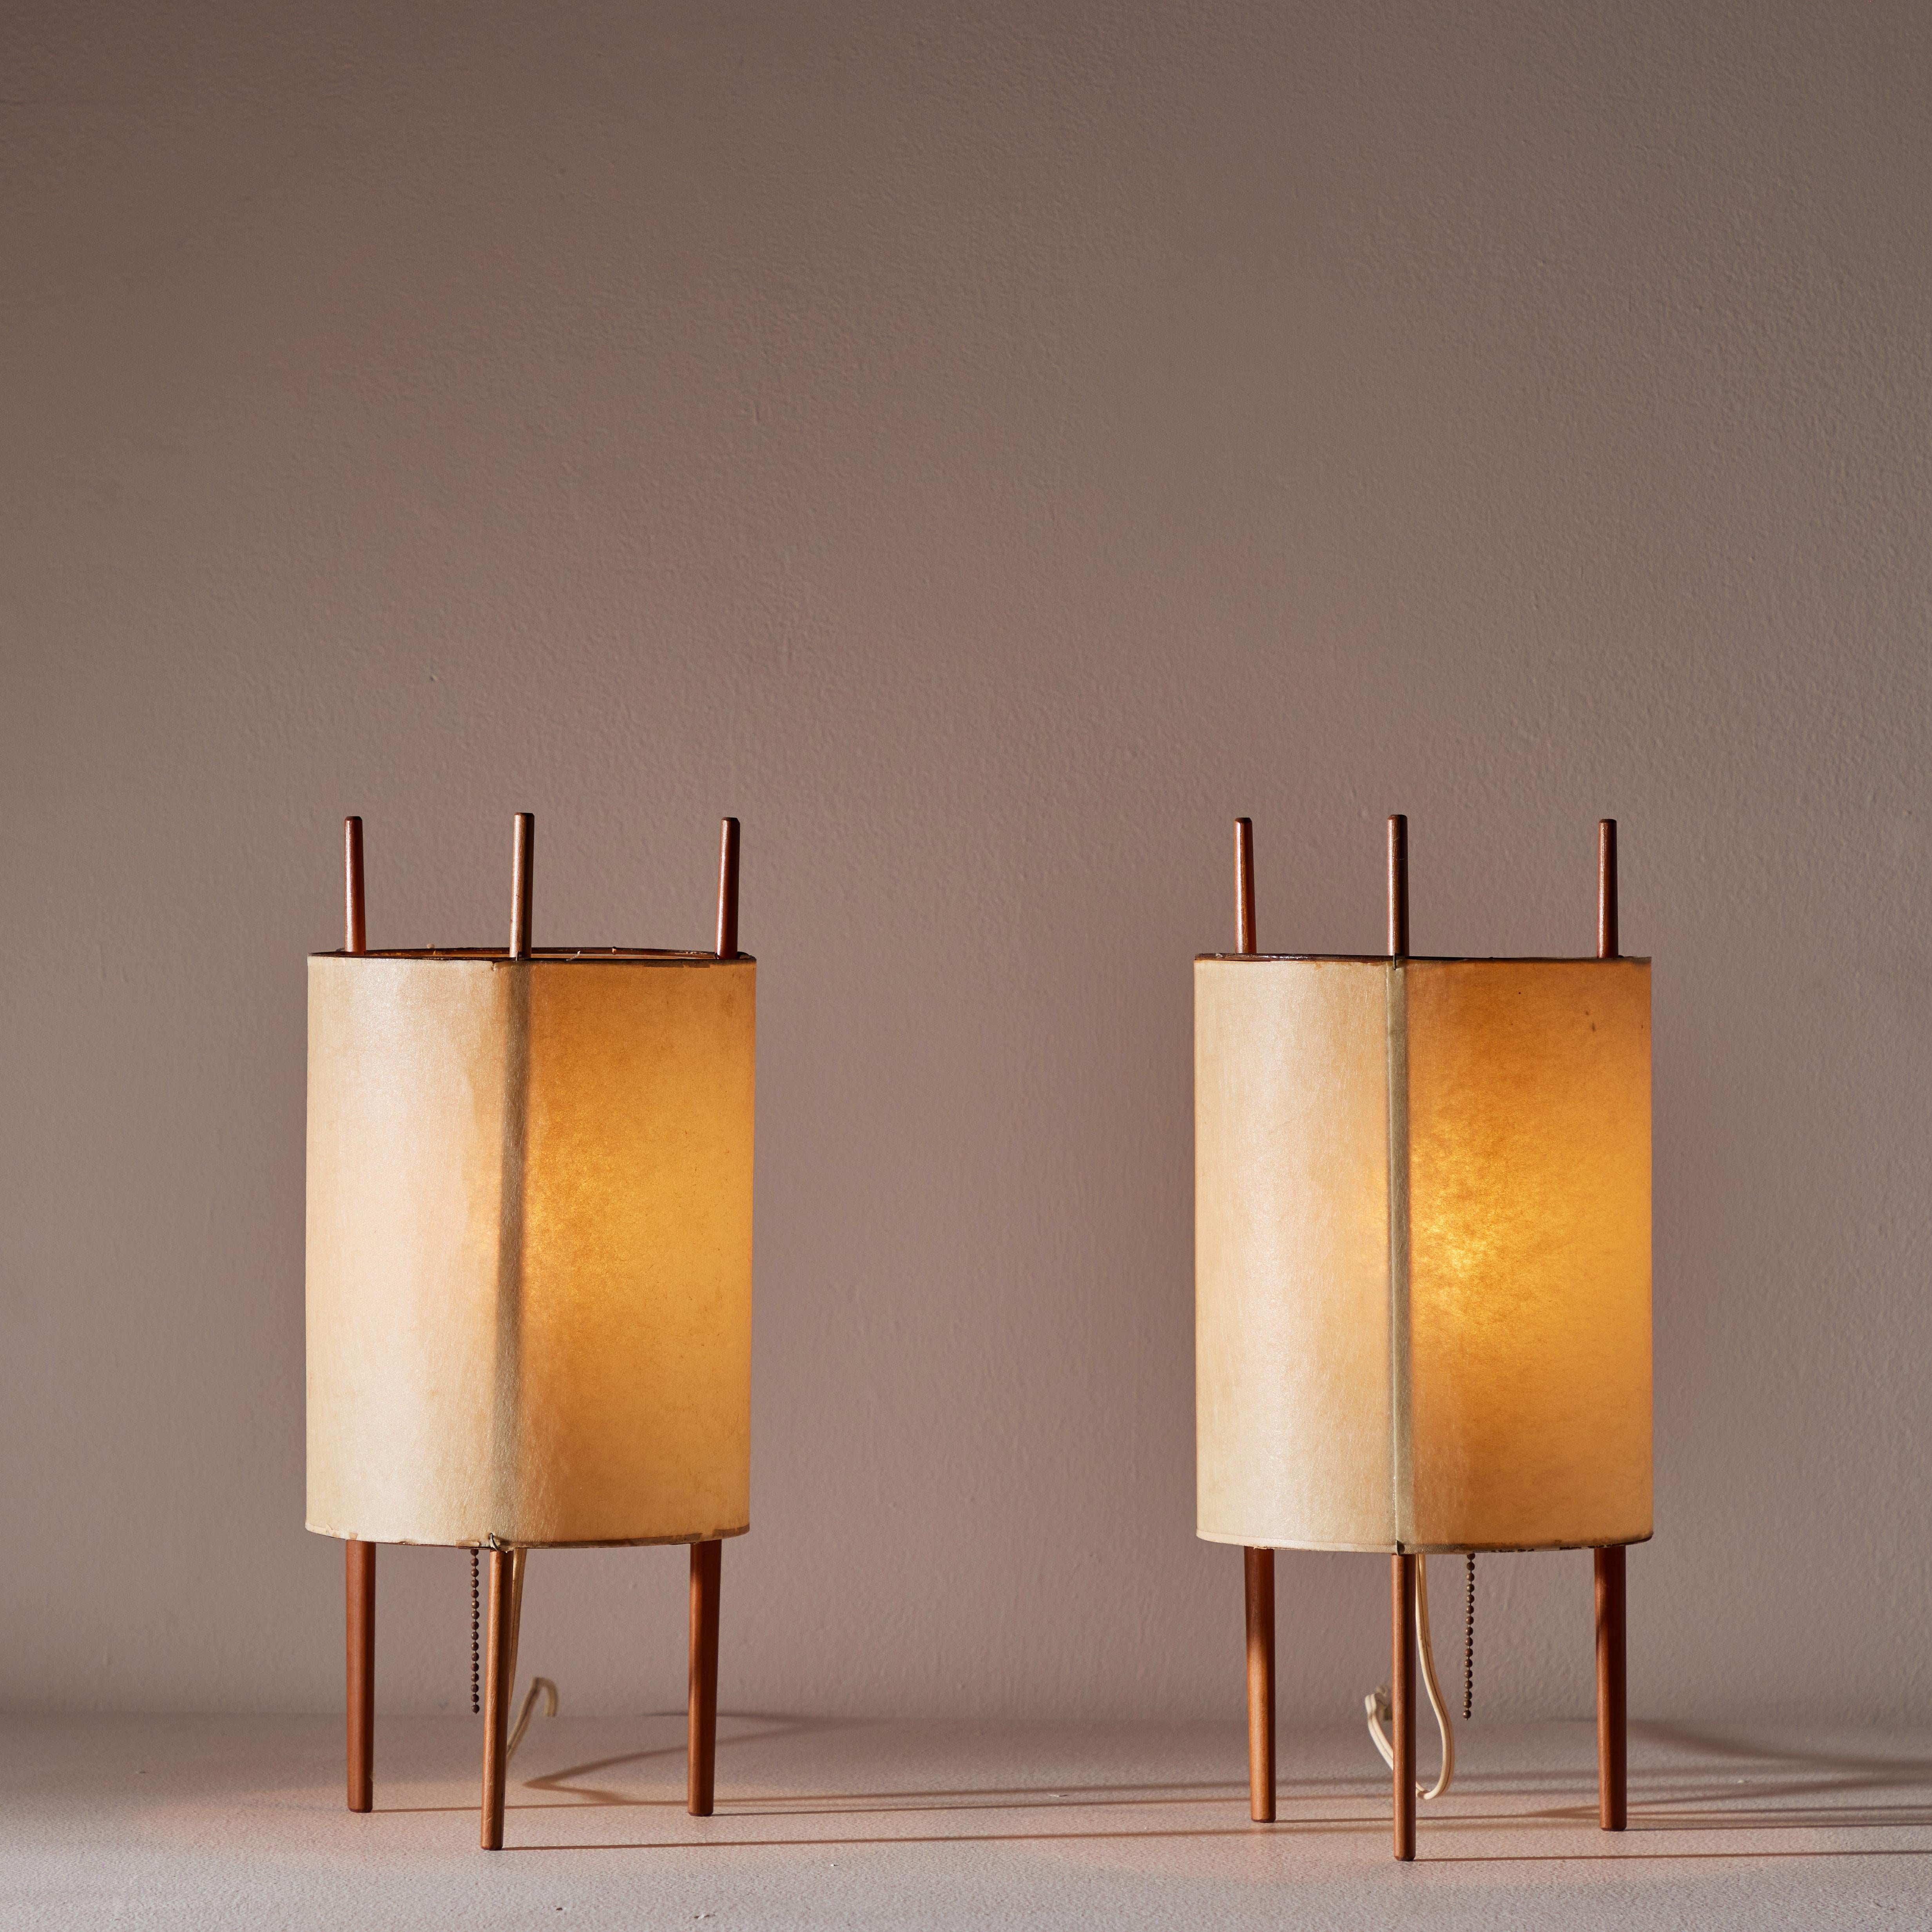 Pair of table lamps by Isamu Noguchi for Knoll. Manufactured in U.S. circa early 1950's. Parchment paper shade, cherrywood frame. Original cord that works with U.S. sockets. We recommend one E27 60w maximum bulb per fixture. Bulbs provided as a one